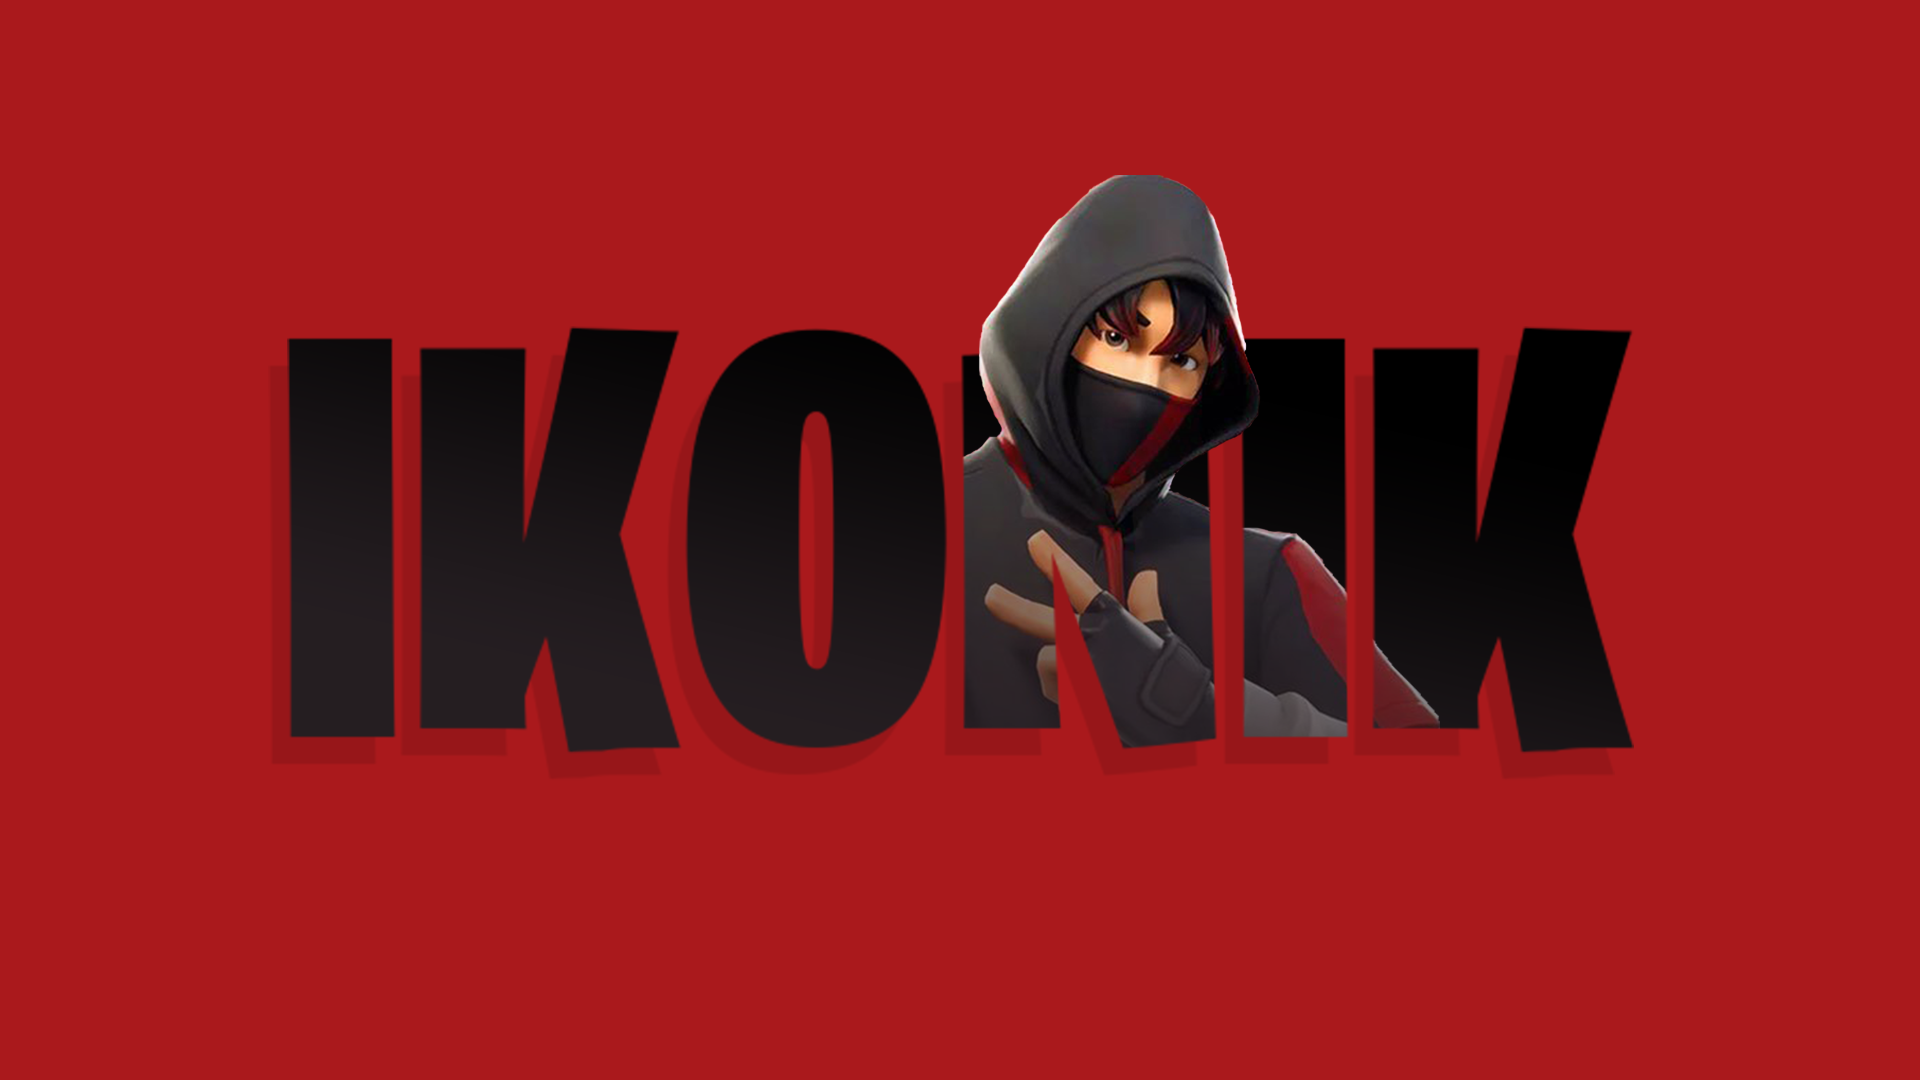 I Made A Background Banner For The Release Of The IKONIK Skin. Enjoy!